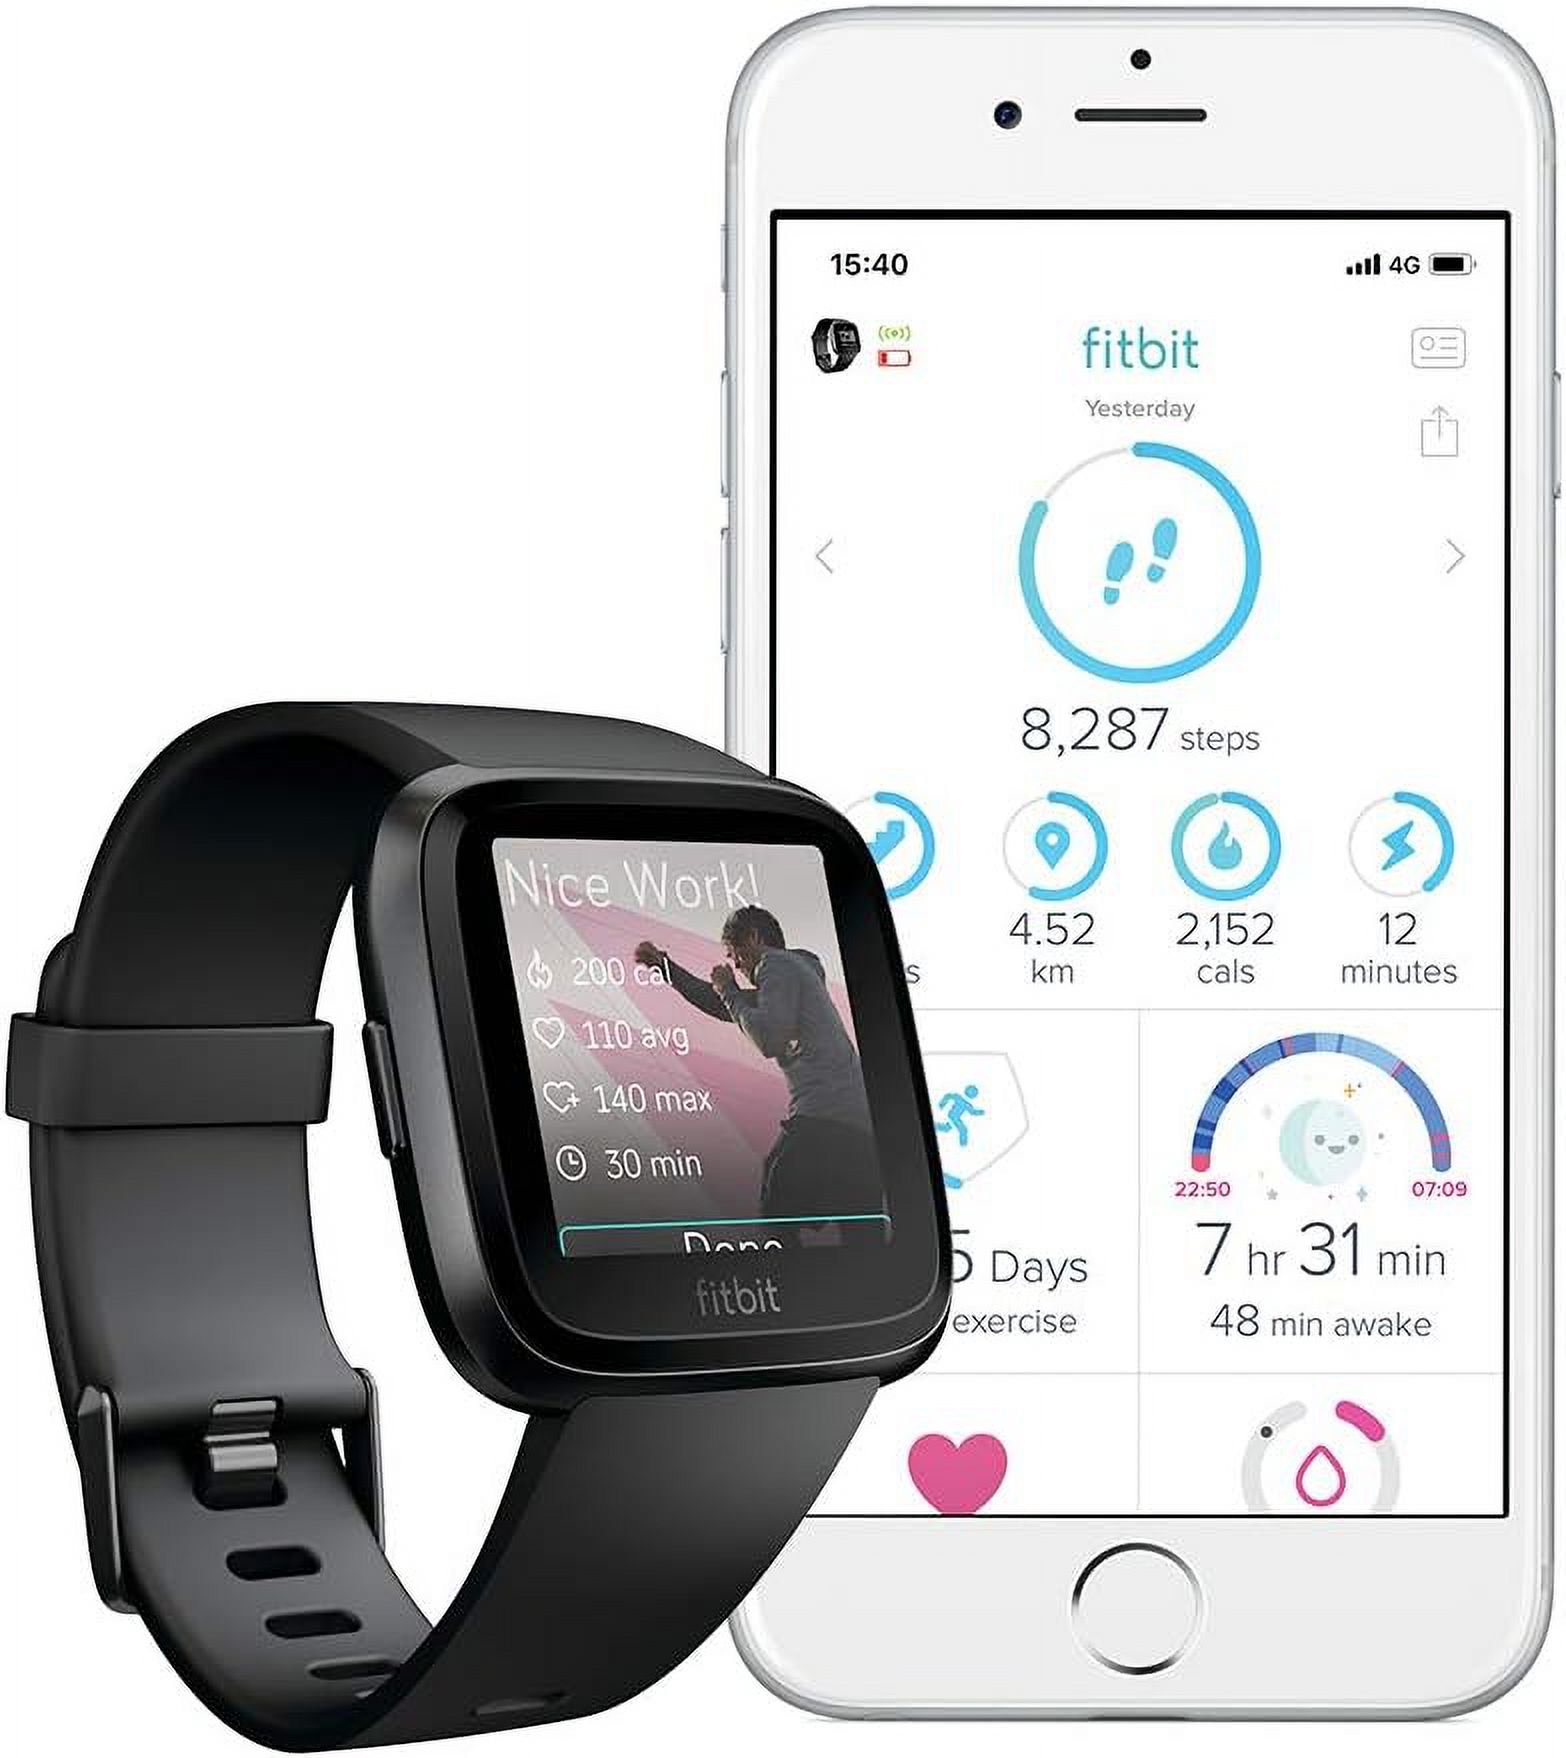 Fitbit Versa Smart Watch, Black/Black Aluminium, One Size (S & L Bands Included) - image 2 of 11